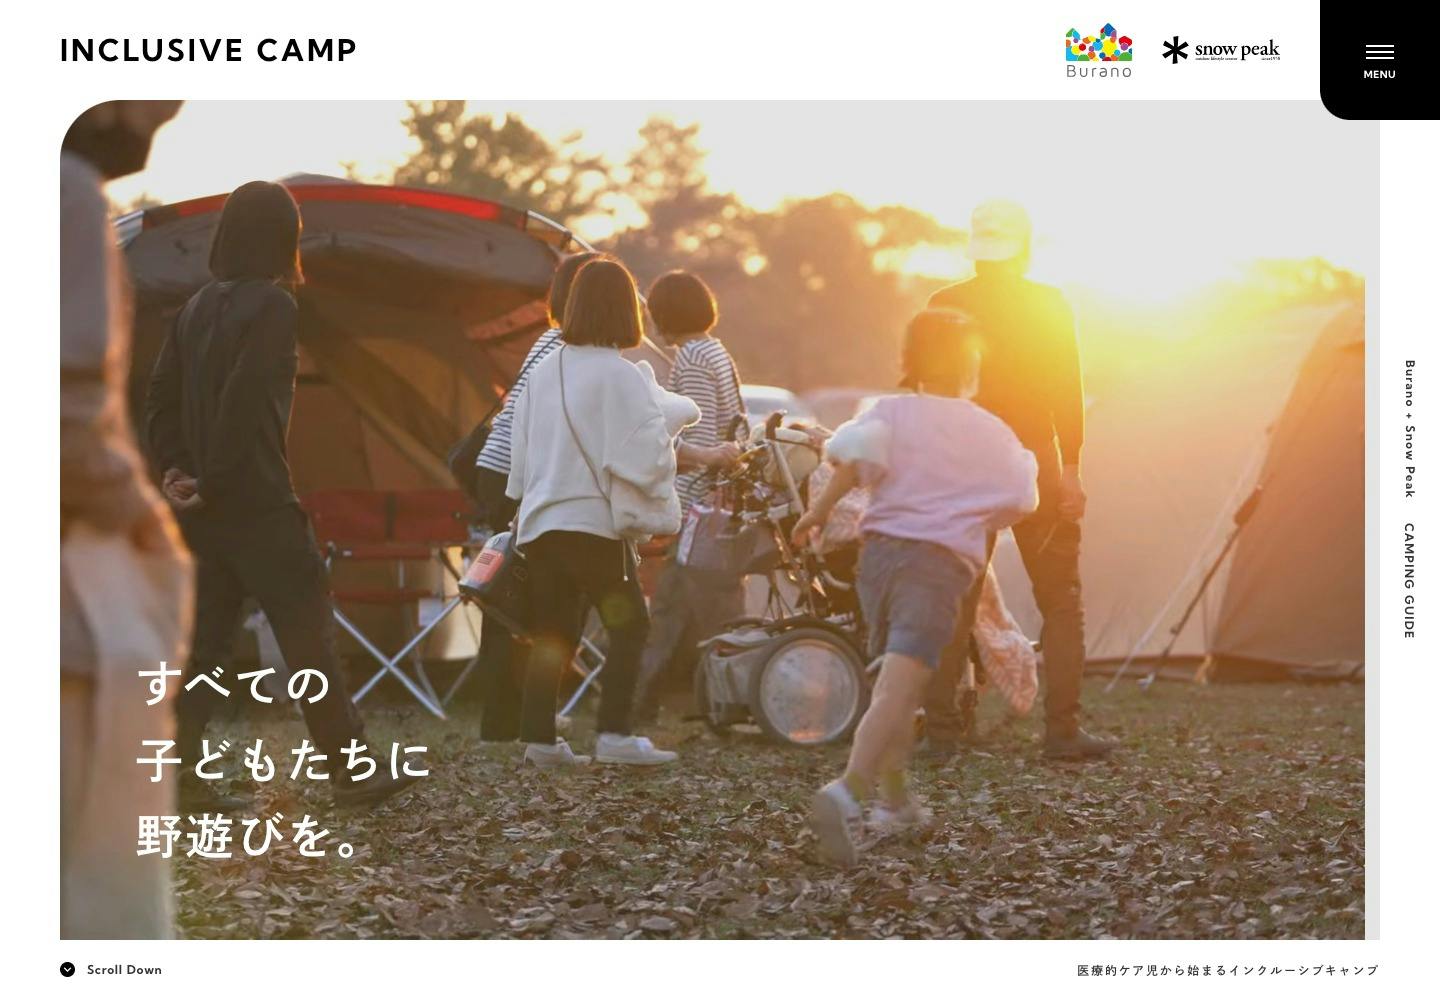 Cover Image for INCLUSIVE CAMP